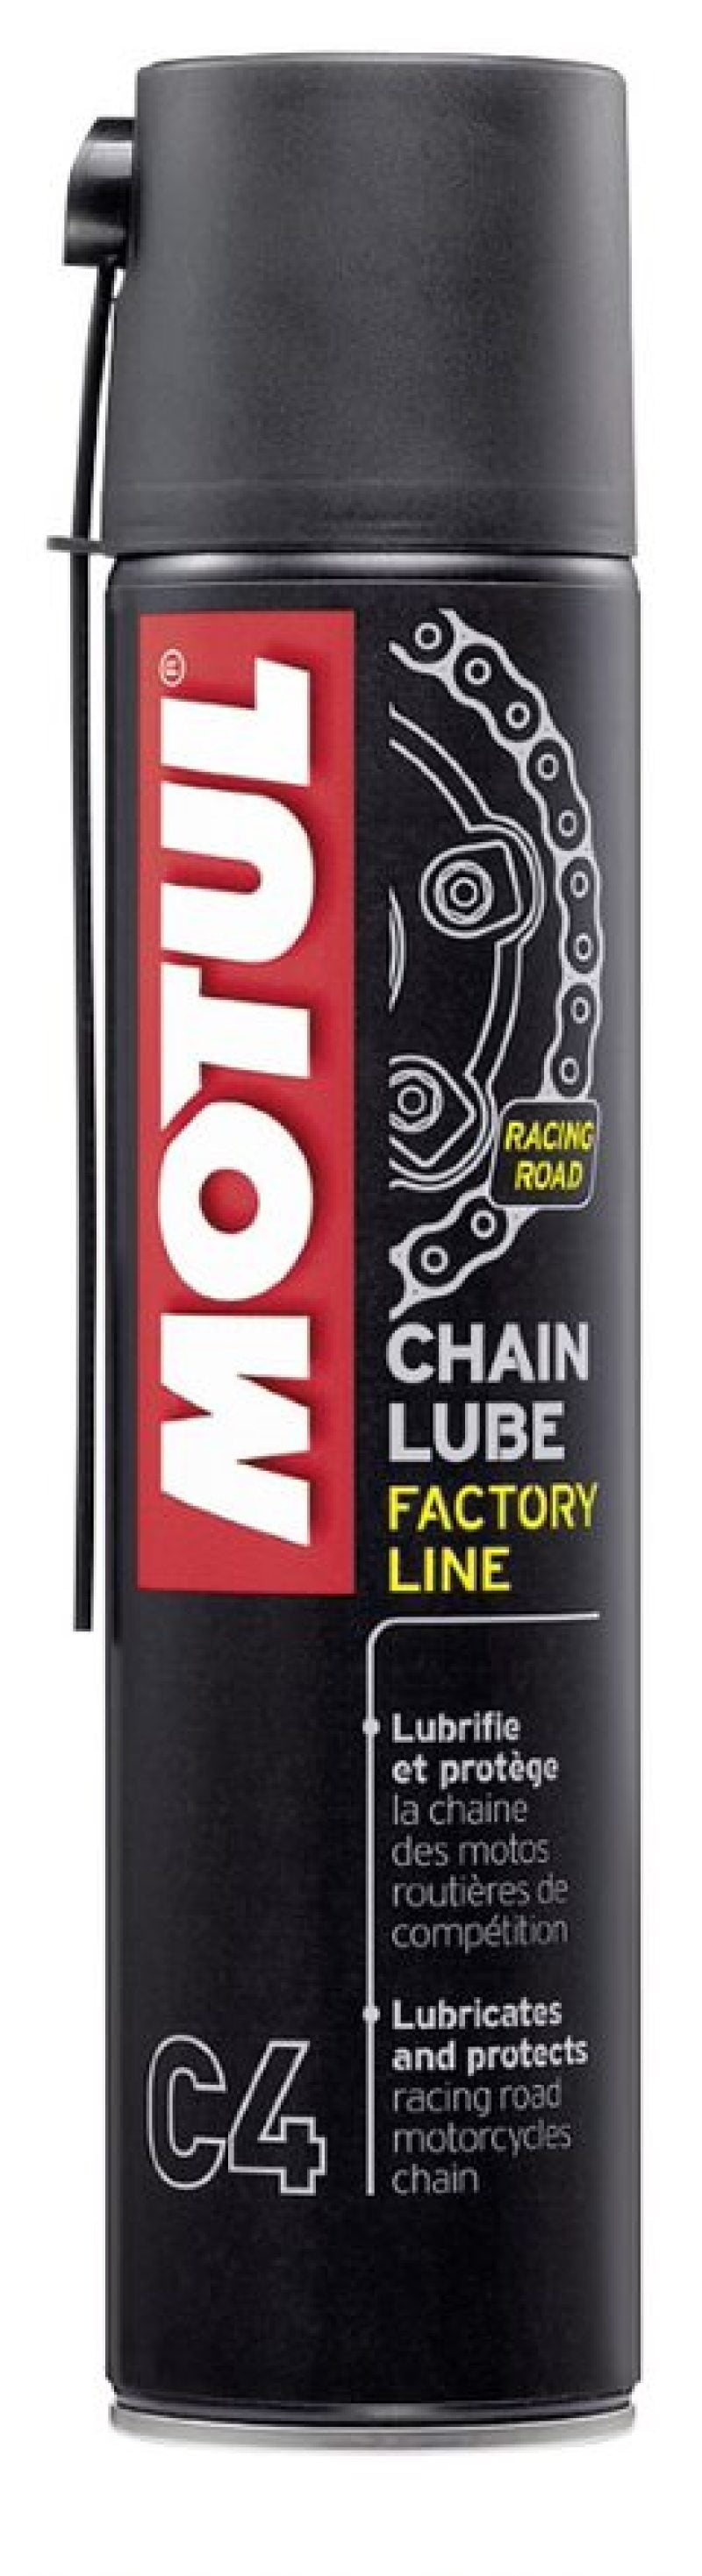 Motul .400L Cleaners C4 CHAIN LUBE FACTORY LINE 103246